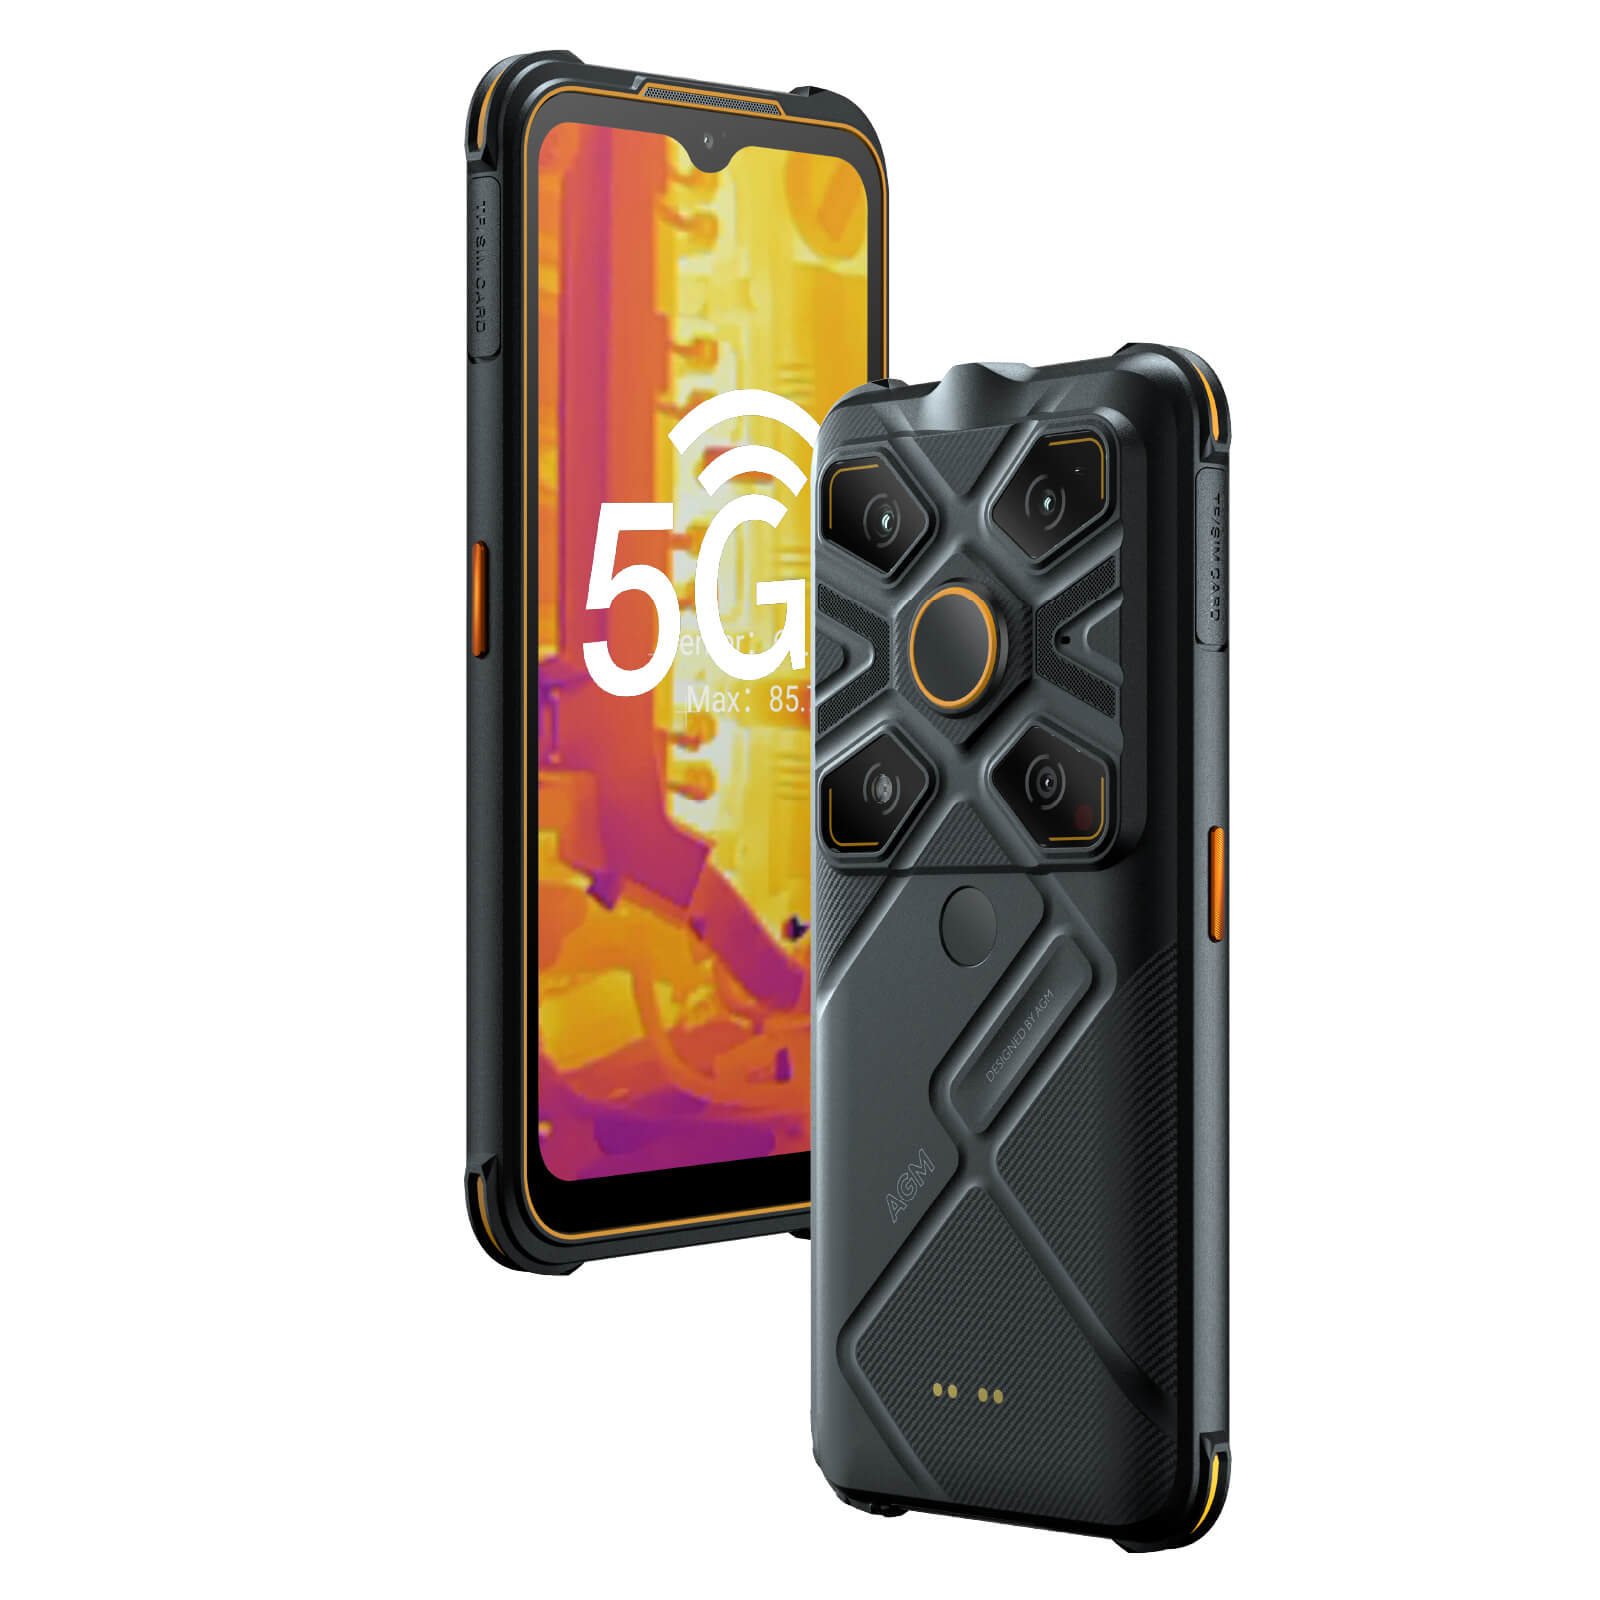 AGM Glory G1S | Top Thermal Camera Resolution: 256 x 192 Frame Rate: 25 FPS | 5G Qualcomm Rugged Smartphone | US Warehouse